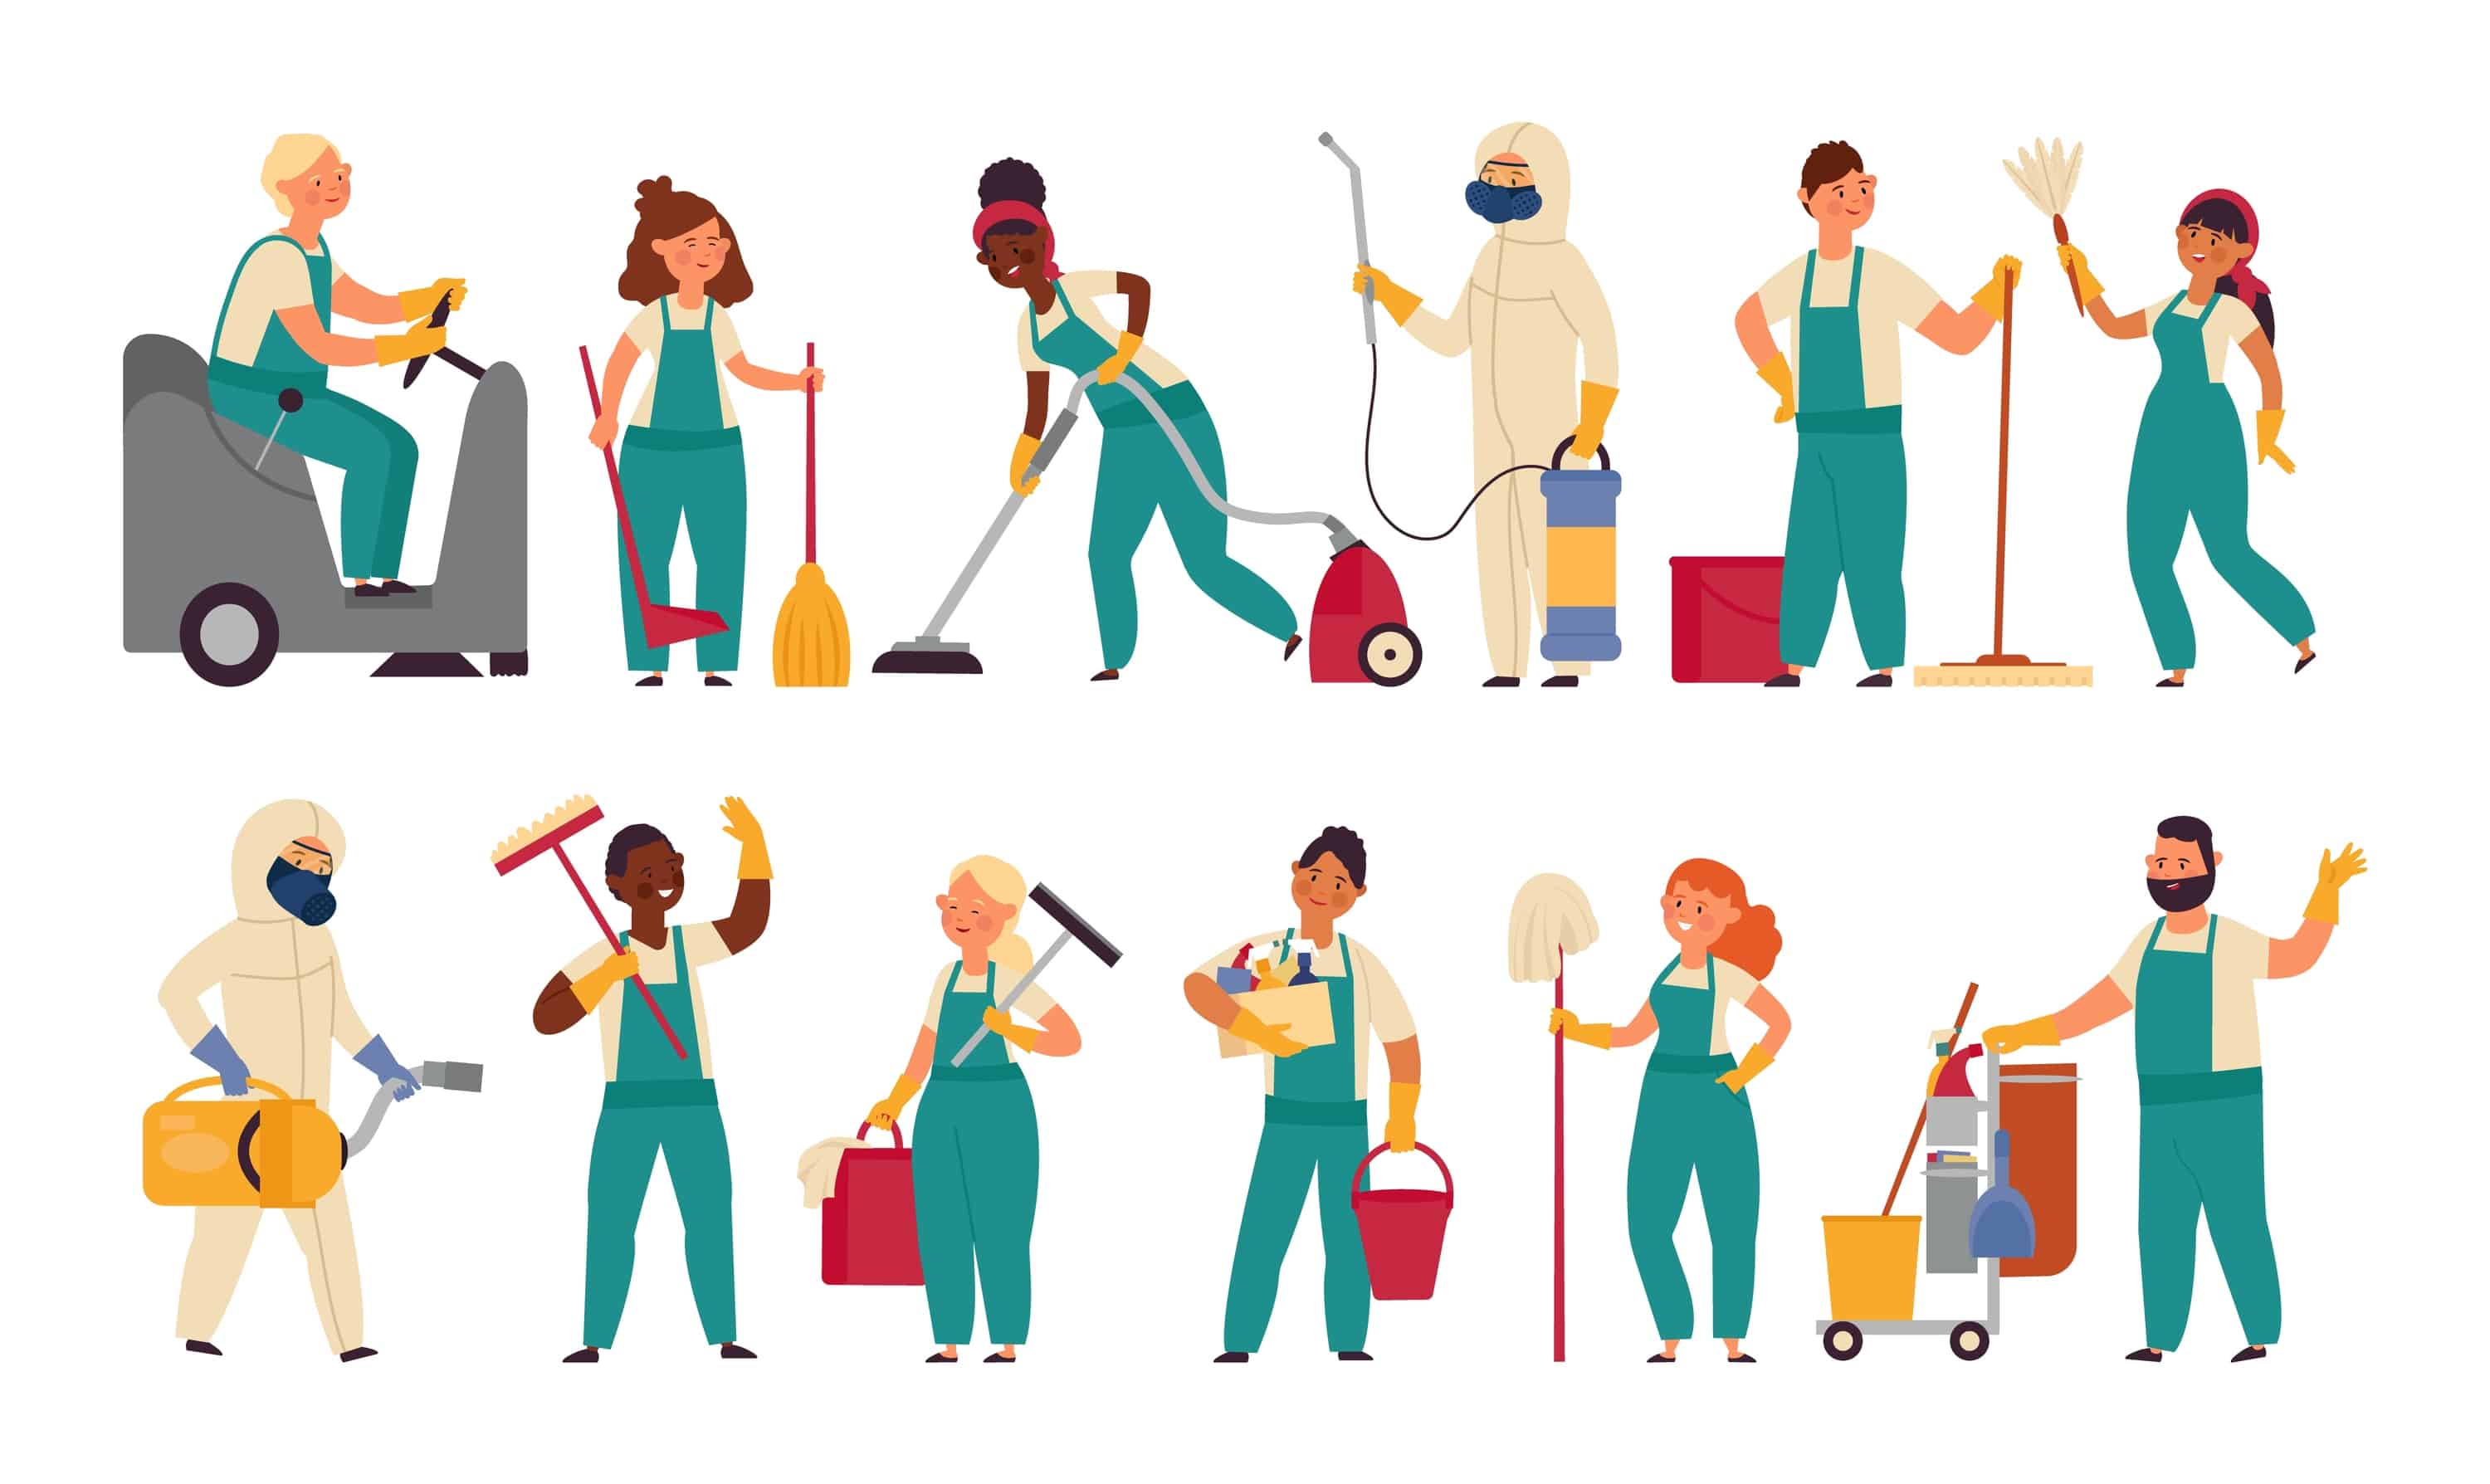 Clip art of different cleaning staff with cleaning supplies and masks